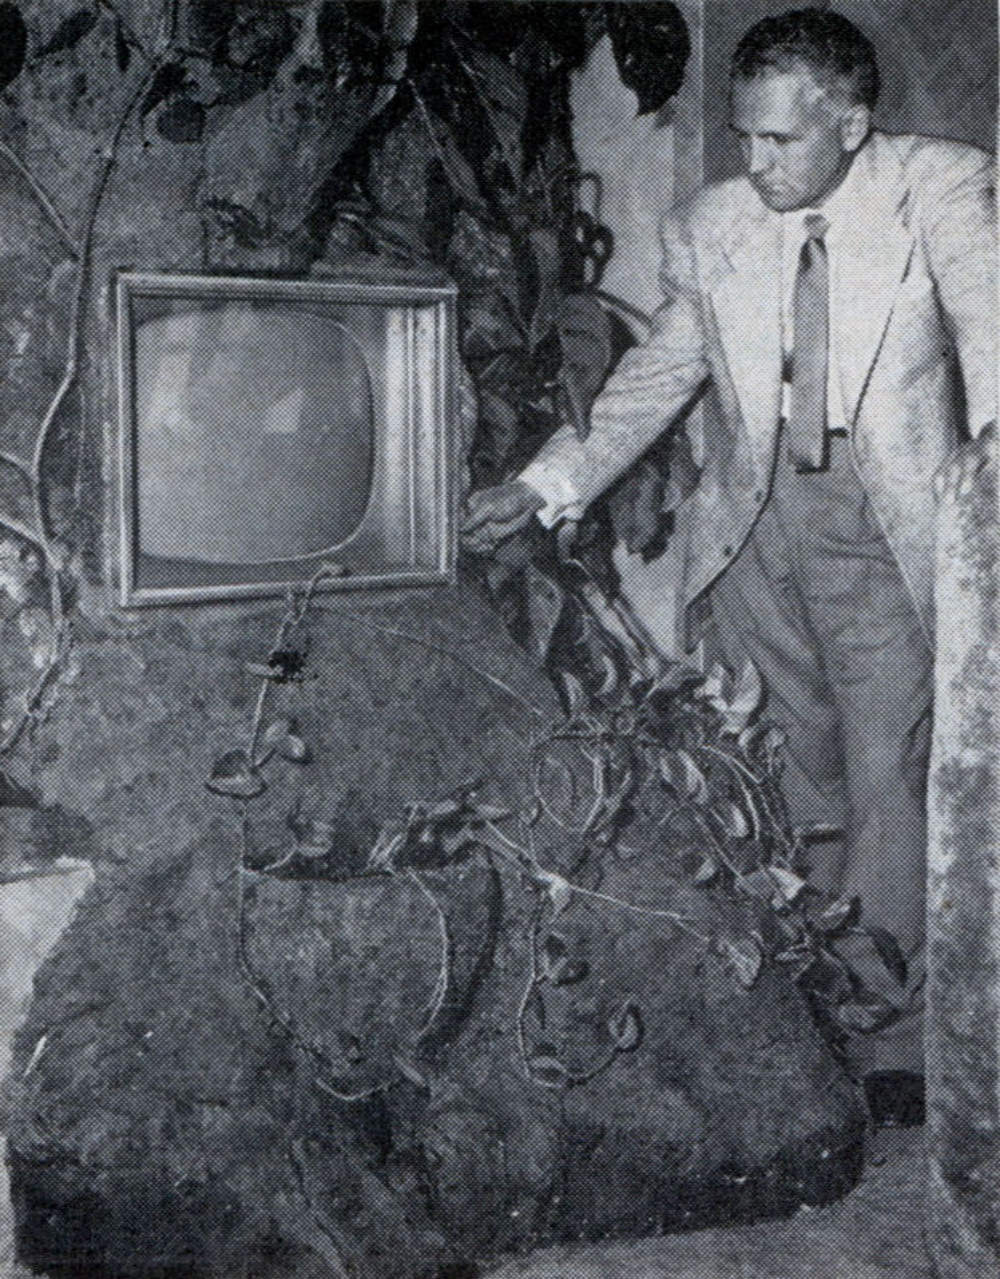 Television set is built into huge tree trunk fitted into wall of living room. Dials are mounted at side.